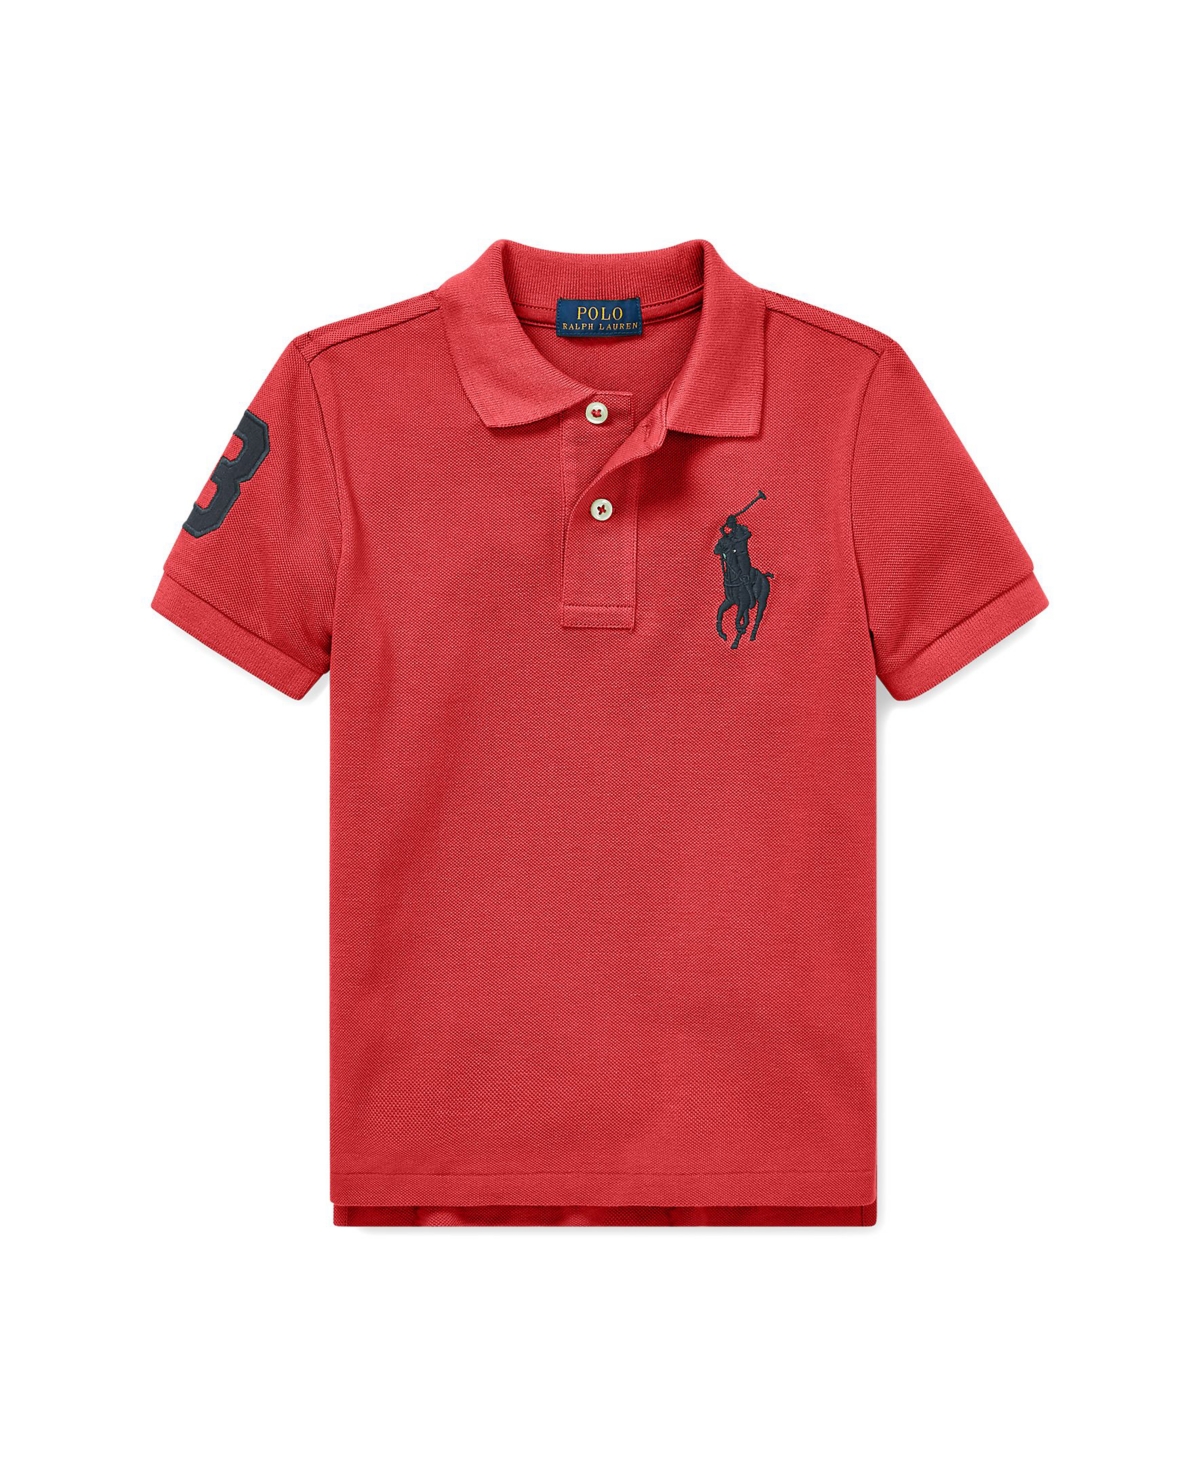 Polo Ralph Lauren Kids' Toddler And Little Boys Big Pony Cotton Mesh Polo Shirt In Nantucket Red